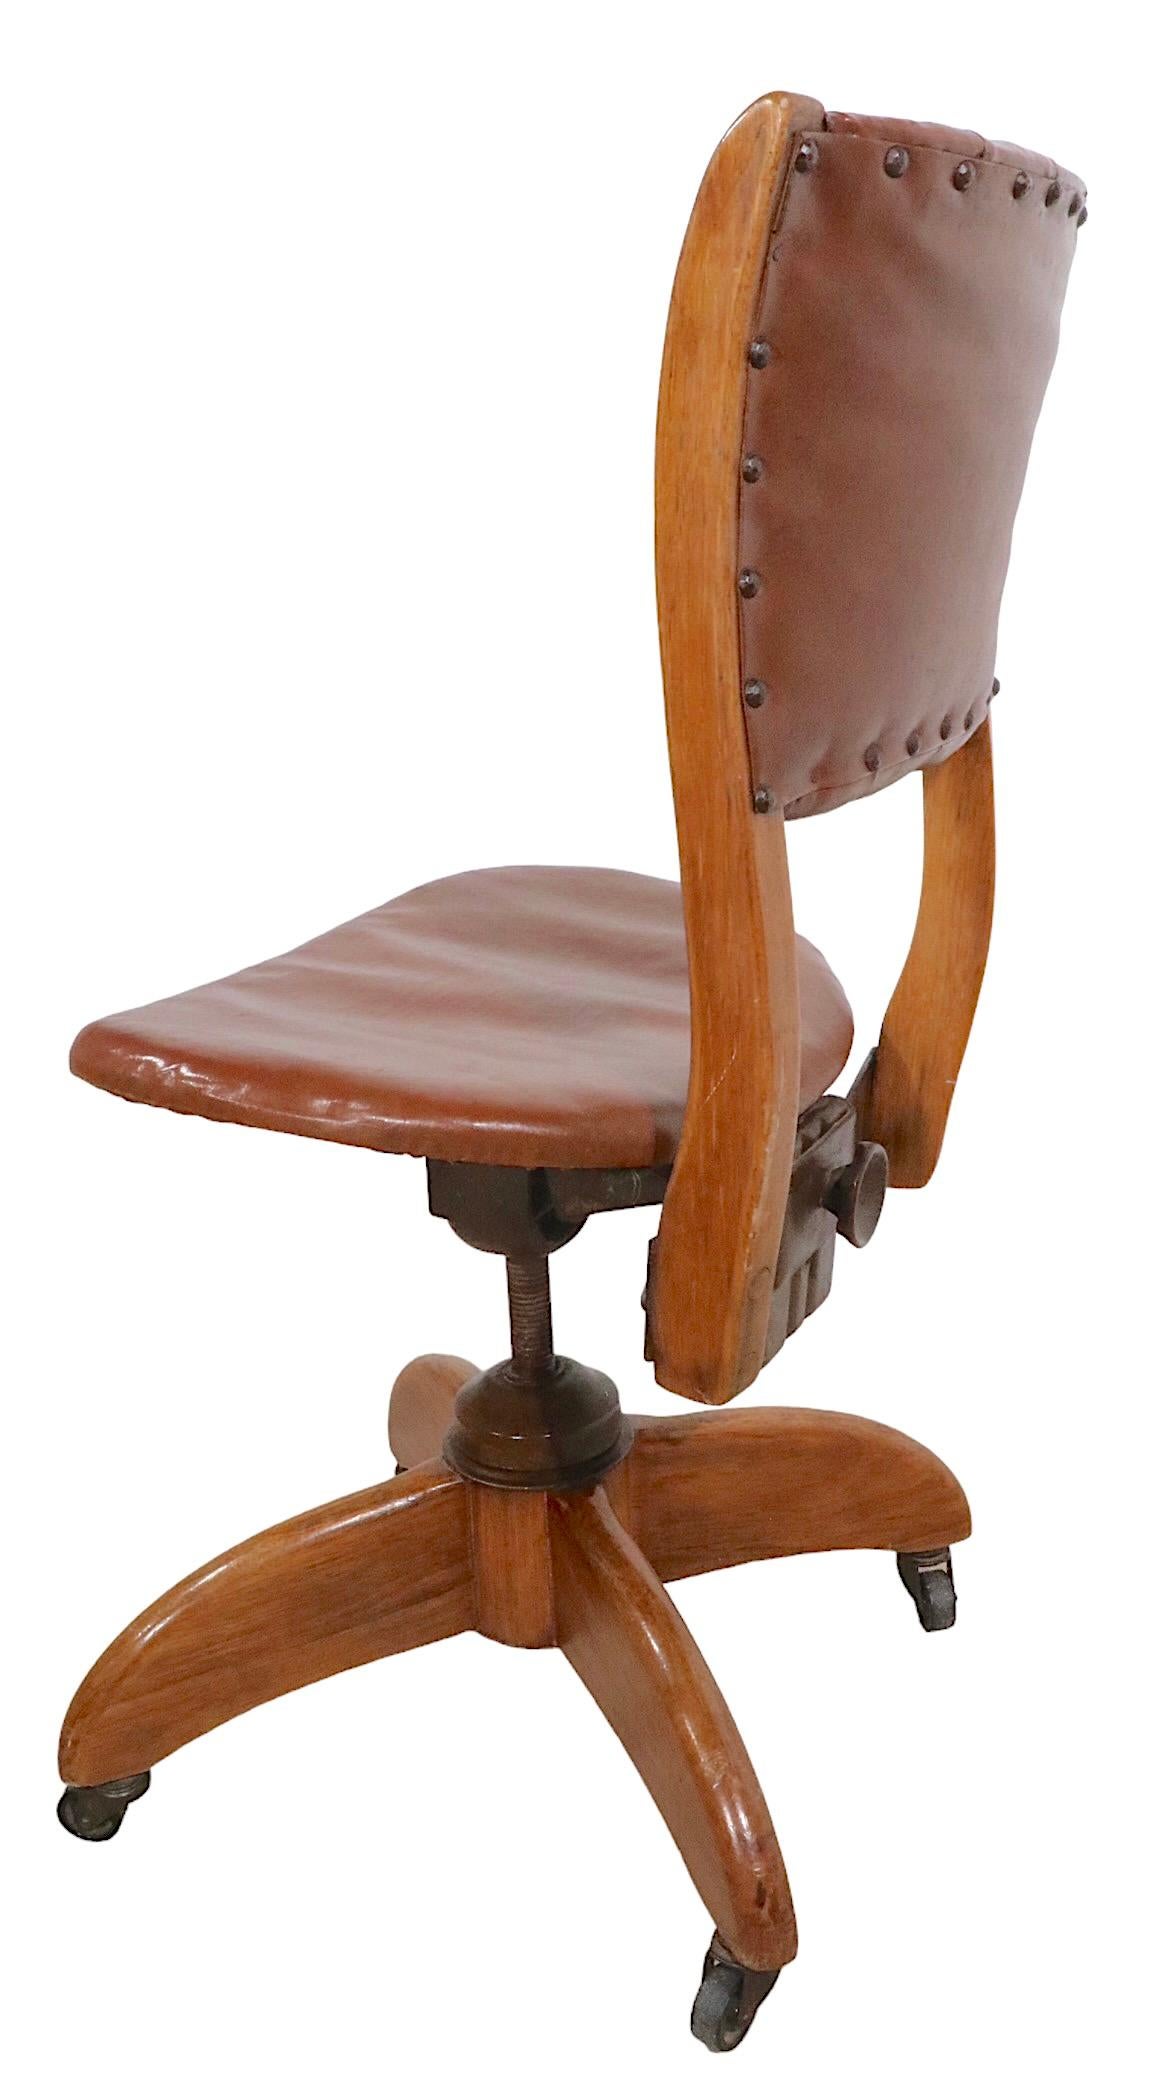 Exceptional example of a classic swivel desk, office, task chair by noted American maker, Gunlocke. The chair is in very fine, original, clean and ready to use. The frame is of solid wood, the upholstery is vintage ( original ) oilcloth. The seat